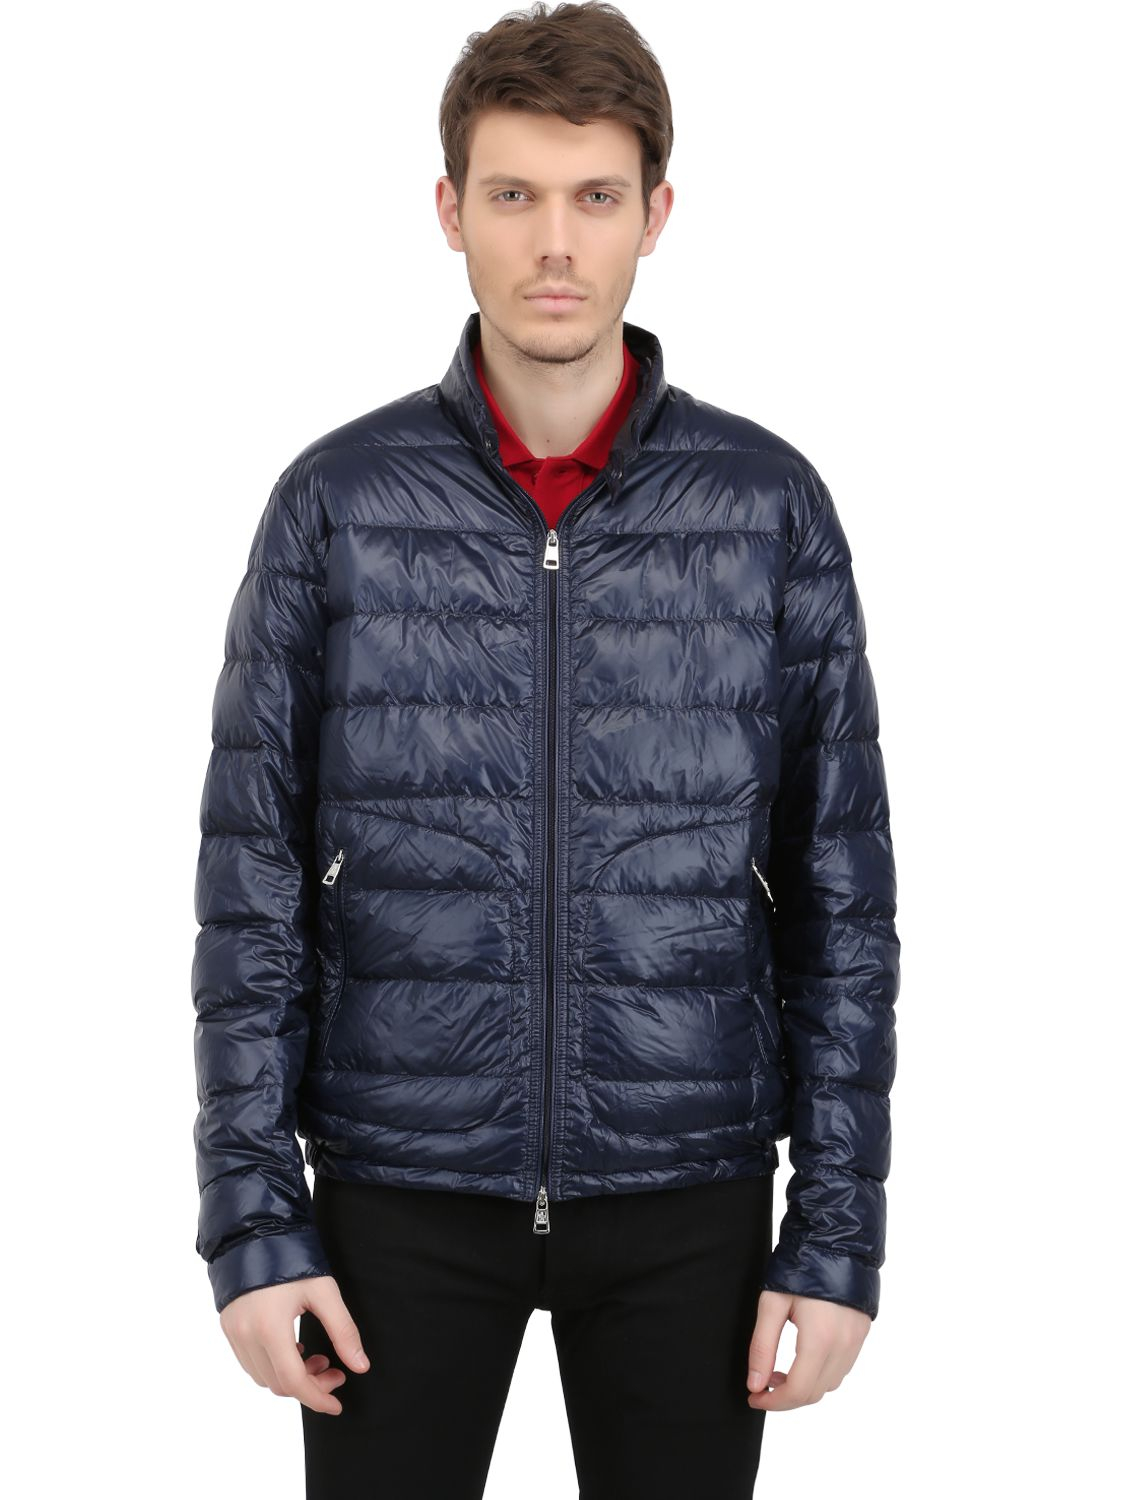 Lyst - Moncler Acorus Nylon Light Weight Down Jacket in Blue for Men